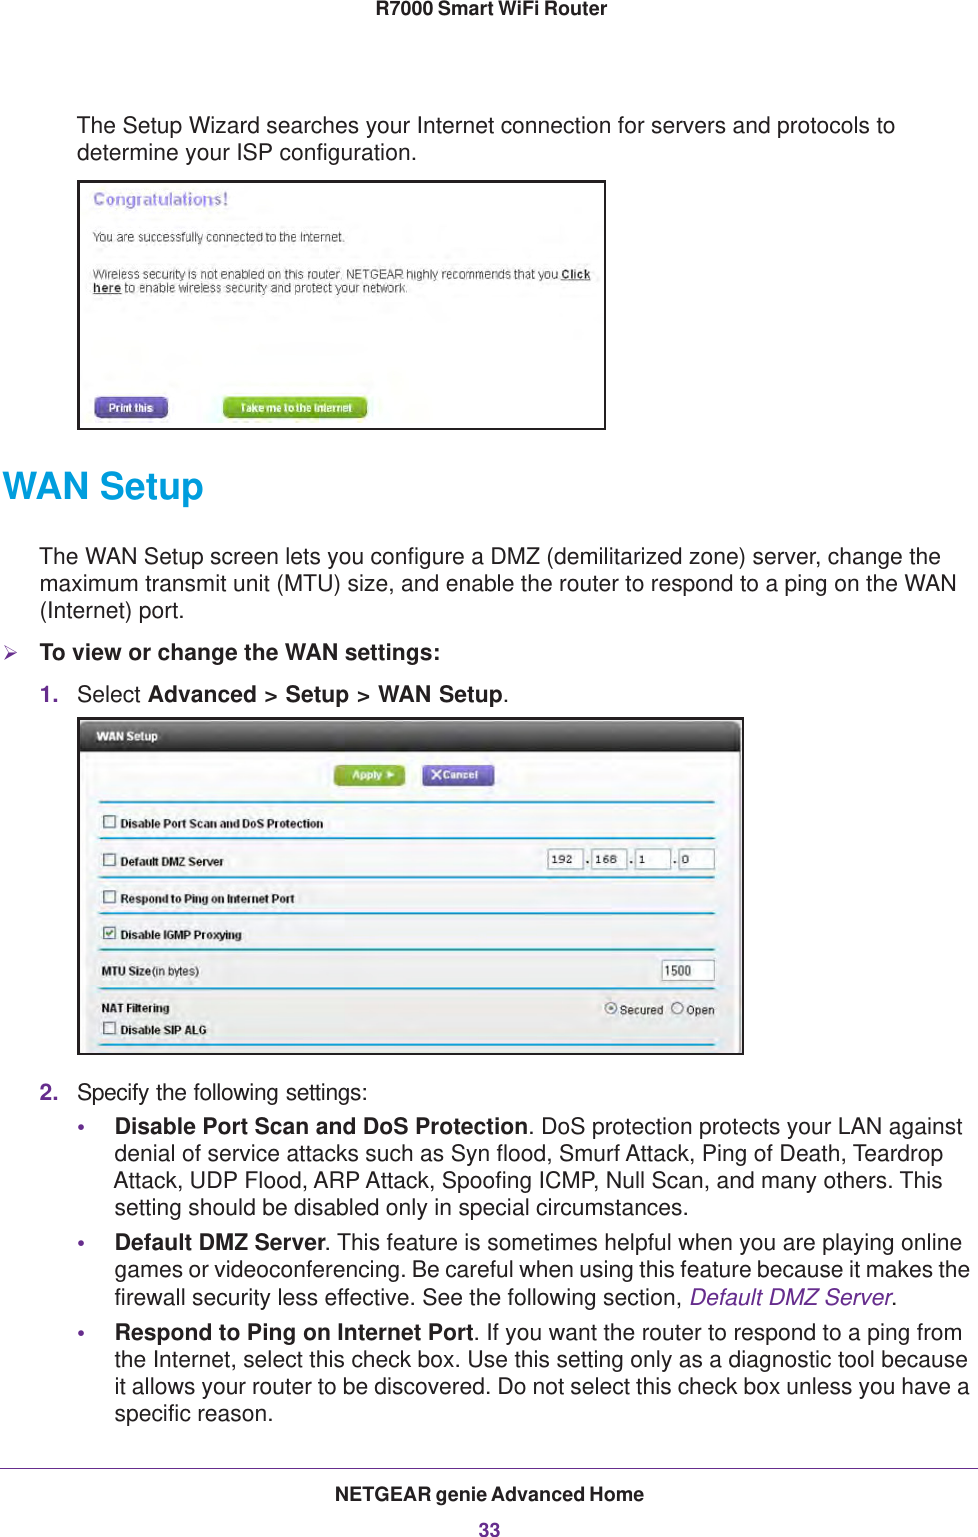 NETGEAR genie Advanced Home33 R7000 Smart WiFi RouterThe Setup Wizard searches your Internet connection for servers and protocols to determine your ISP configuration. WAN SetupThe WAN Setup screen lets you configure a DMZ (demilitarized zone) server, change the maximum transmit unit (MTU) size, and enable the router to respond to a ping on the WAN (Internet) port. To view or change the WAN settings:1. Select Advanced &gt; Setup &gt; WAN Setup.2. Specify the following settings:•Disable Port Scan and DoS Protection. DoS protection protects your LAN against denial of service attacks such as Syn flood, Smurf Attack, Ping of Death, Teardrop Attack, UDP Flood, ARP Attack, Spoofing ICMP, Null Scan, and many others. This setting should be disabled only in special circumstances. •Default DMZ Server. This feature is sometimes helpful when you are playing online games or videoconferencing. Be careful when using this feature because it makes the firewall security less effective. See the following section, Default DMZ Server.•Respond to Ping on Internet Port. If you want the router to respond to a ping from the Internet, select this check box. Use this setting only as a diagnostic tool because it allows your router to be discovered. Do not select this check box unless you have a specific reason.